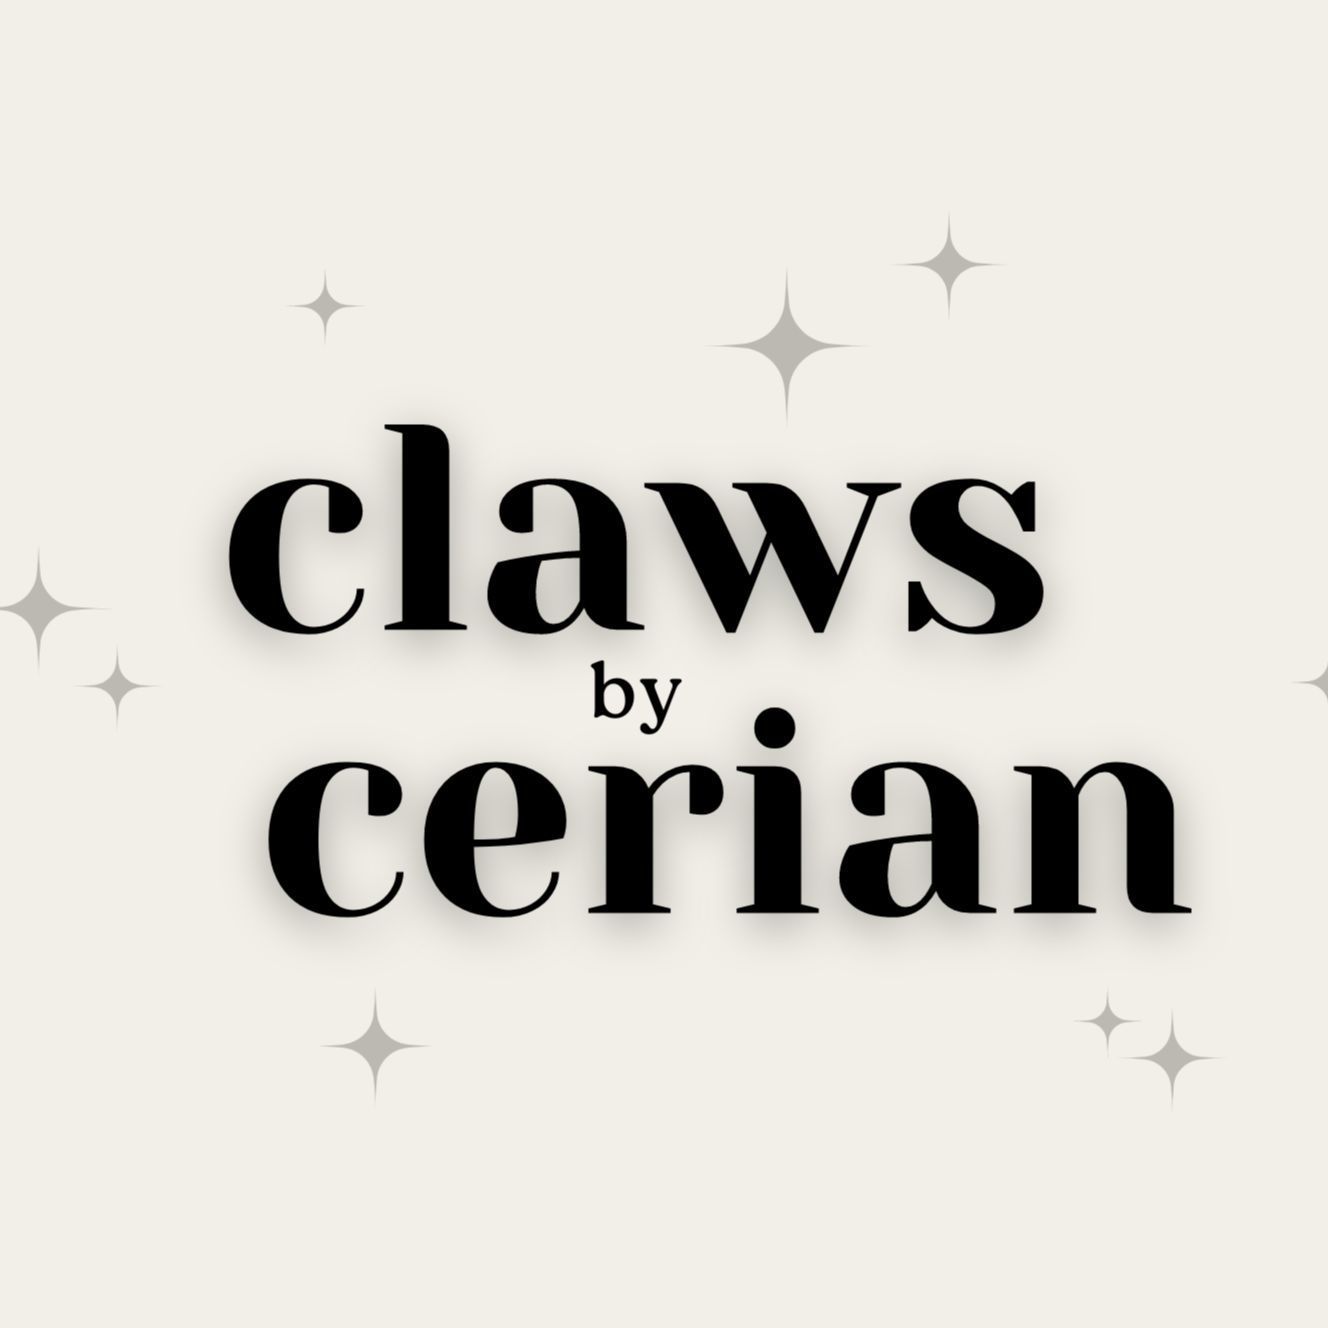 ClawsByCerian, The Business Centre, Cardiff house, CF63 2AW, Barry